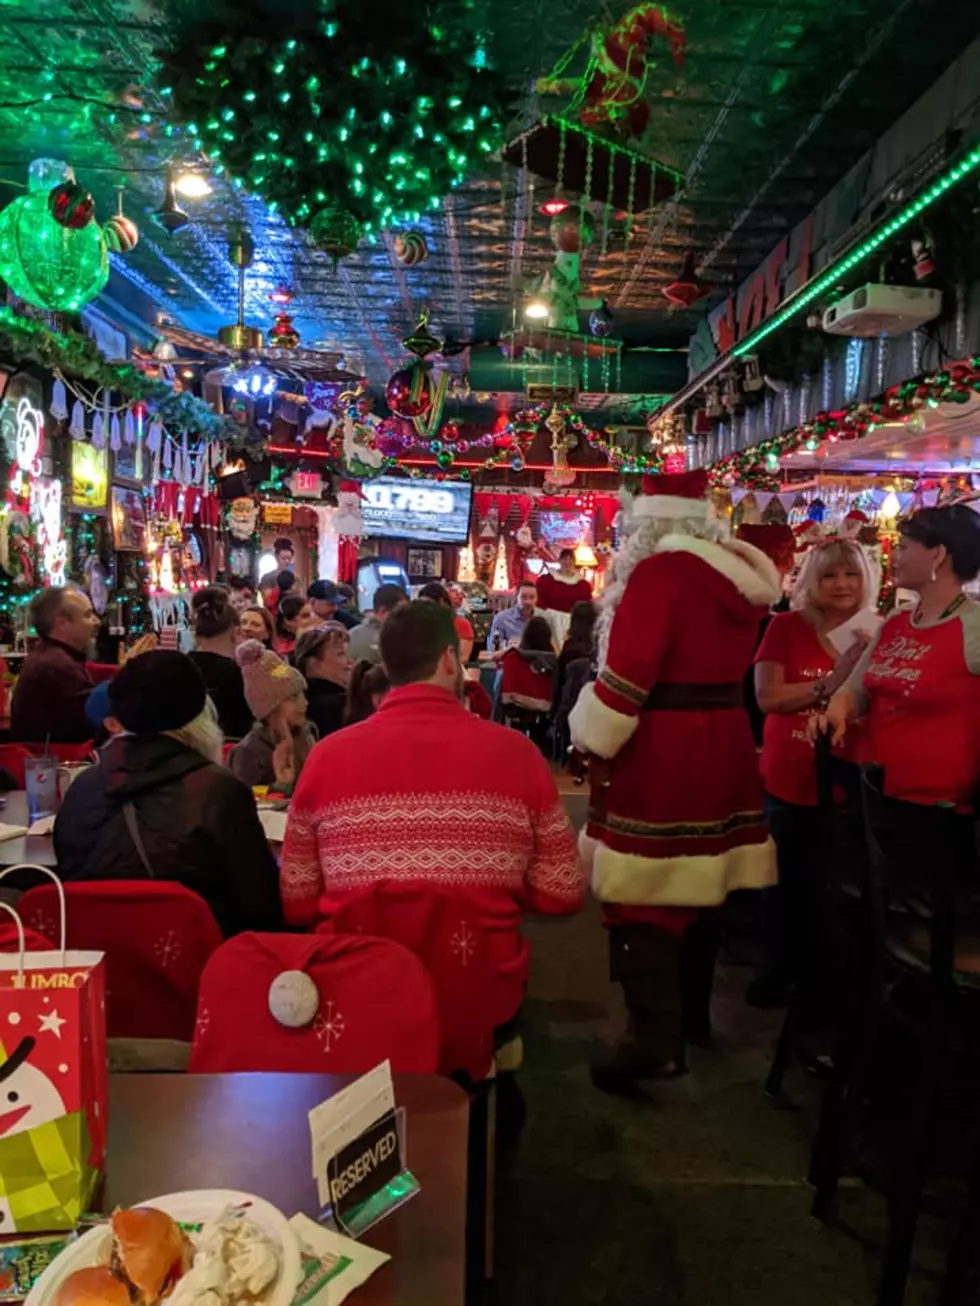 Broadway Bar May Close Without Christmas Crowd [Video]